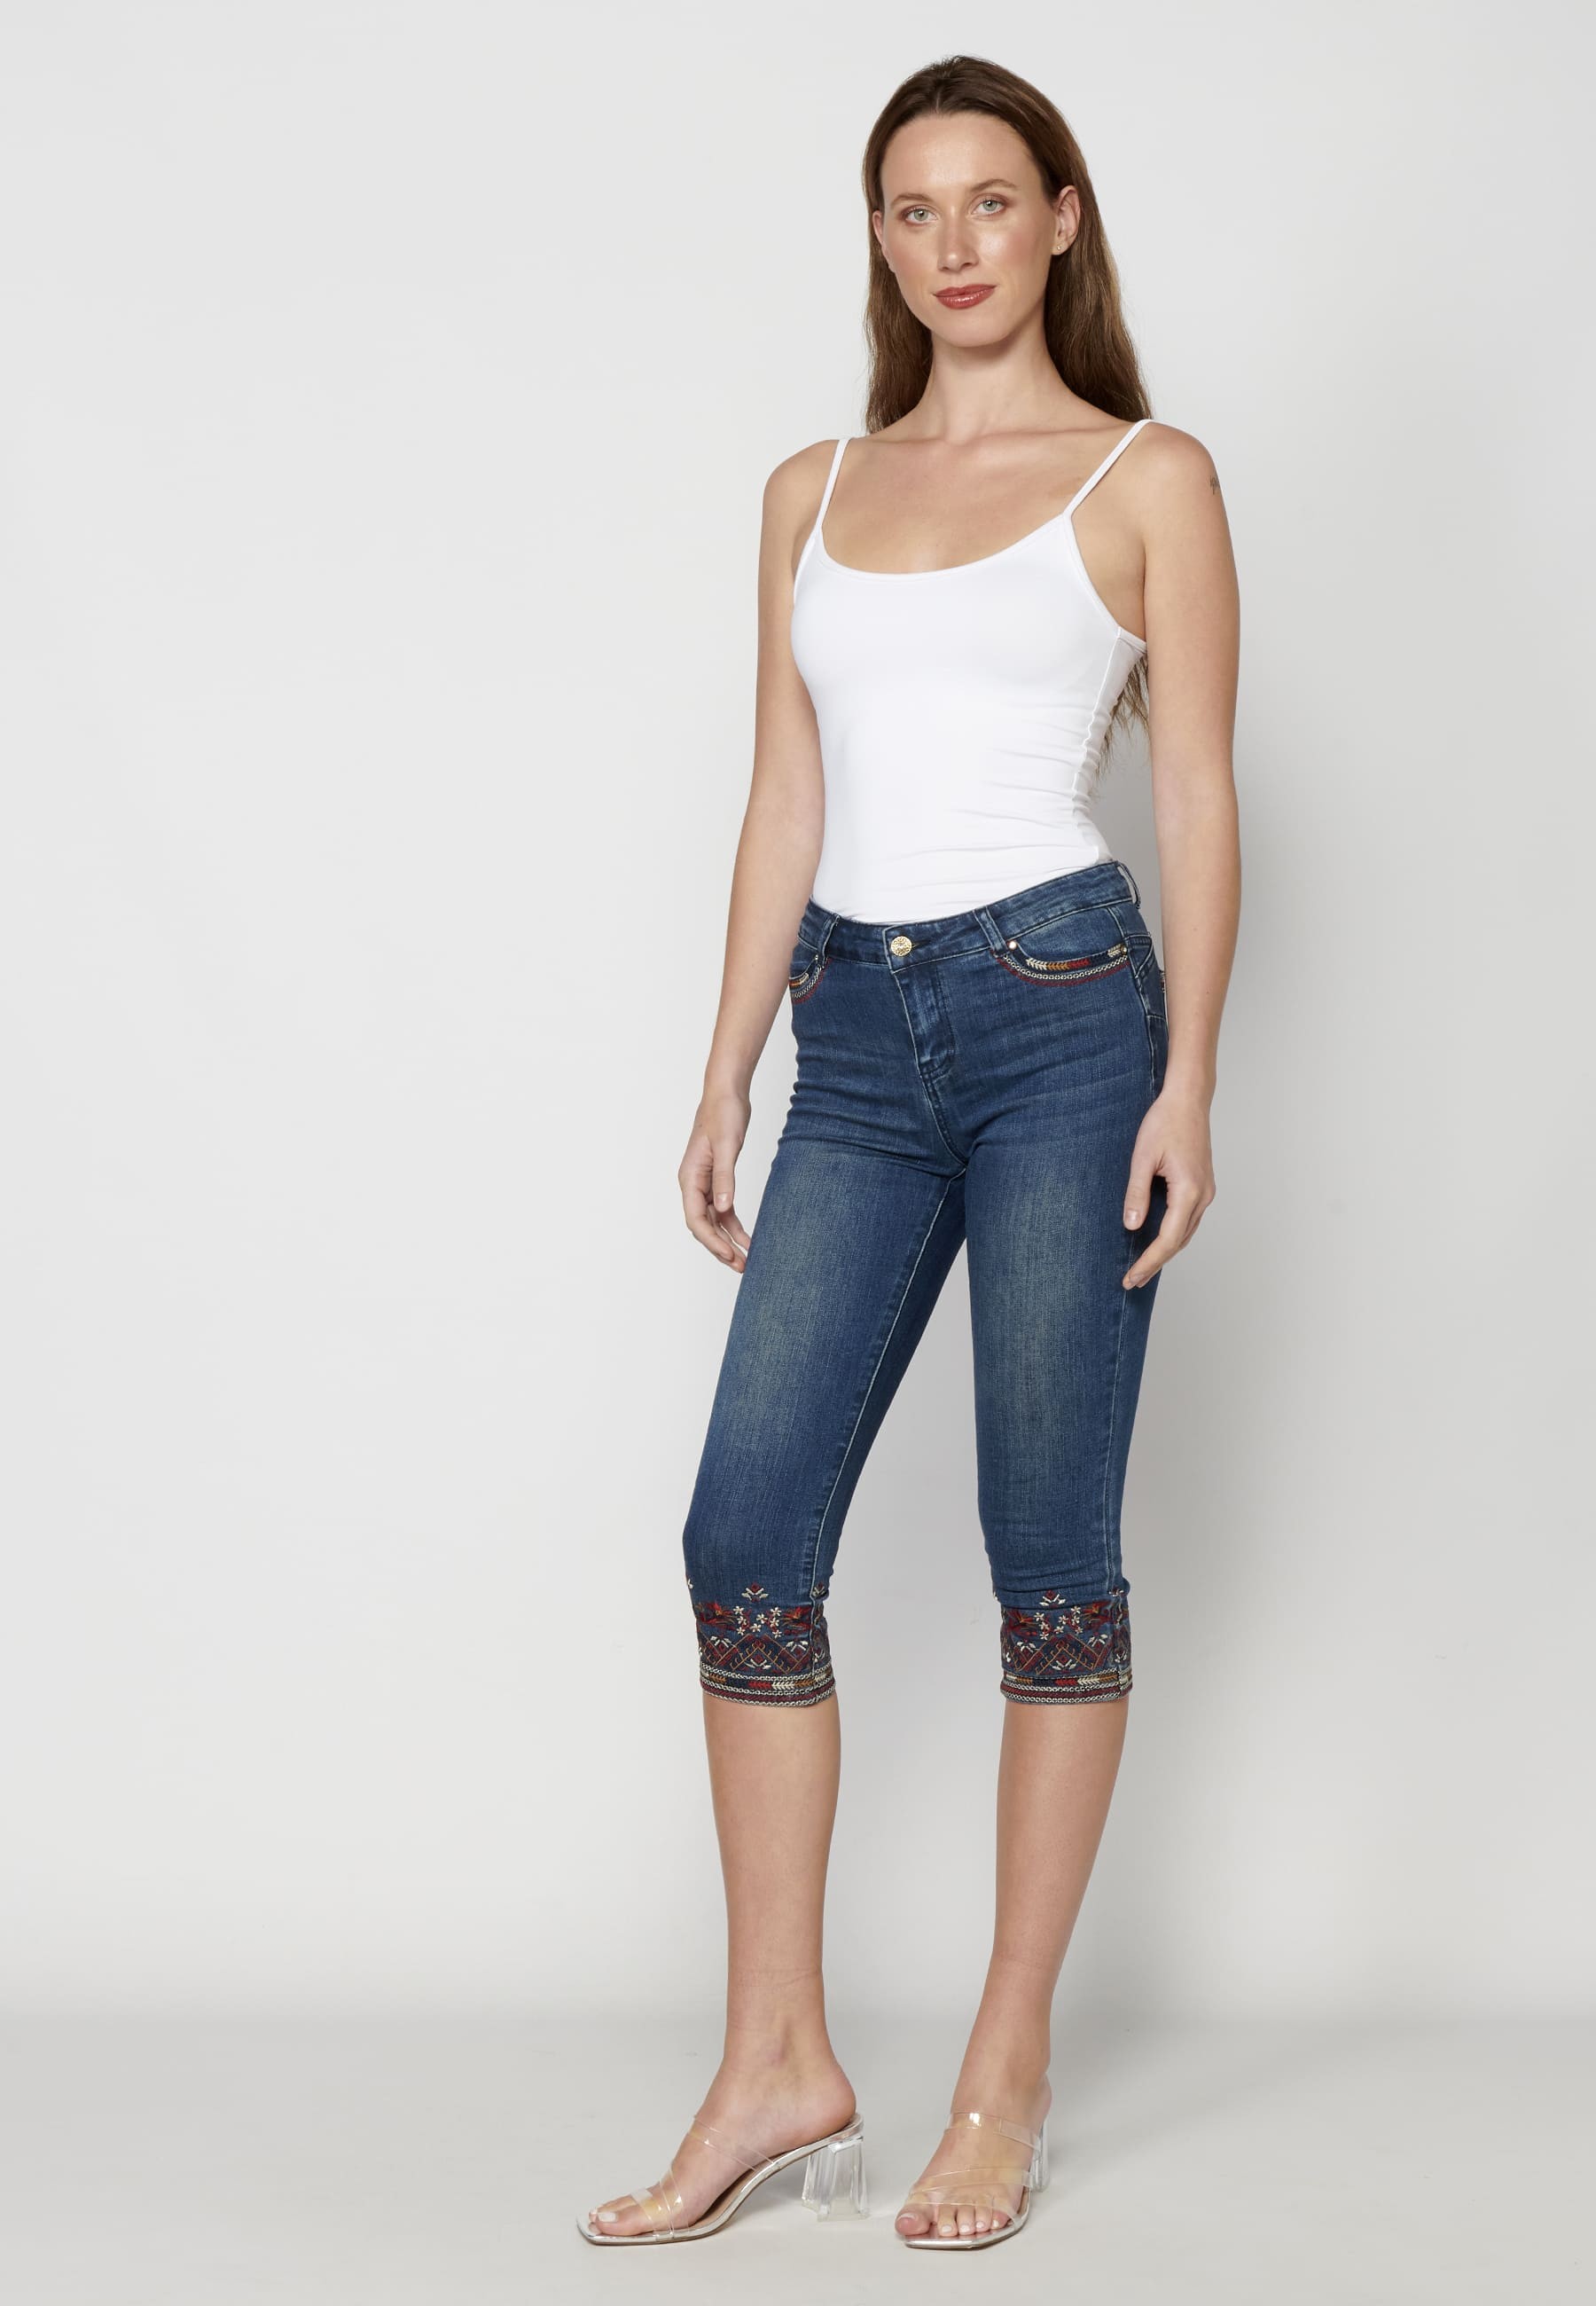 Pirate jeans with blue floral embroidery for Woman